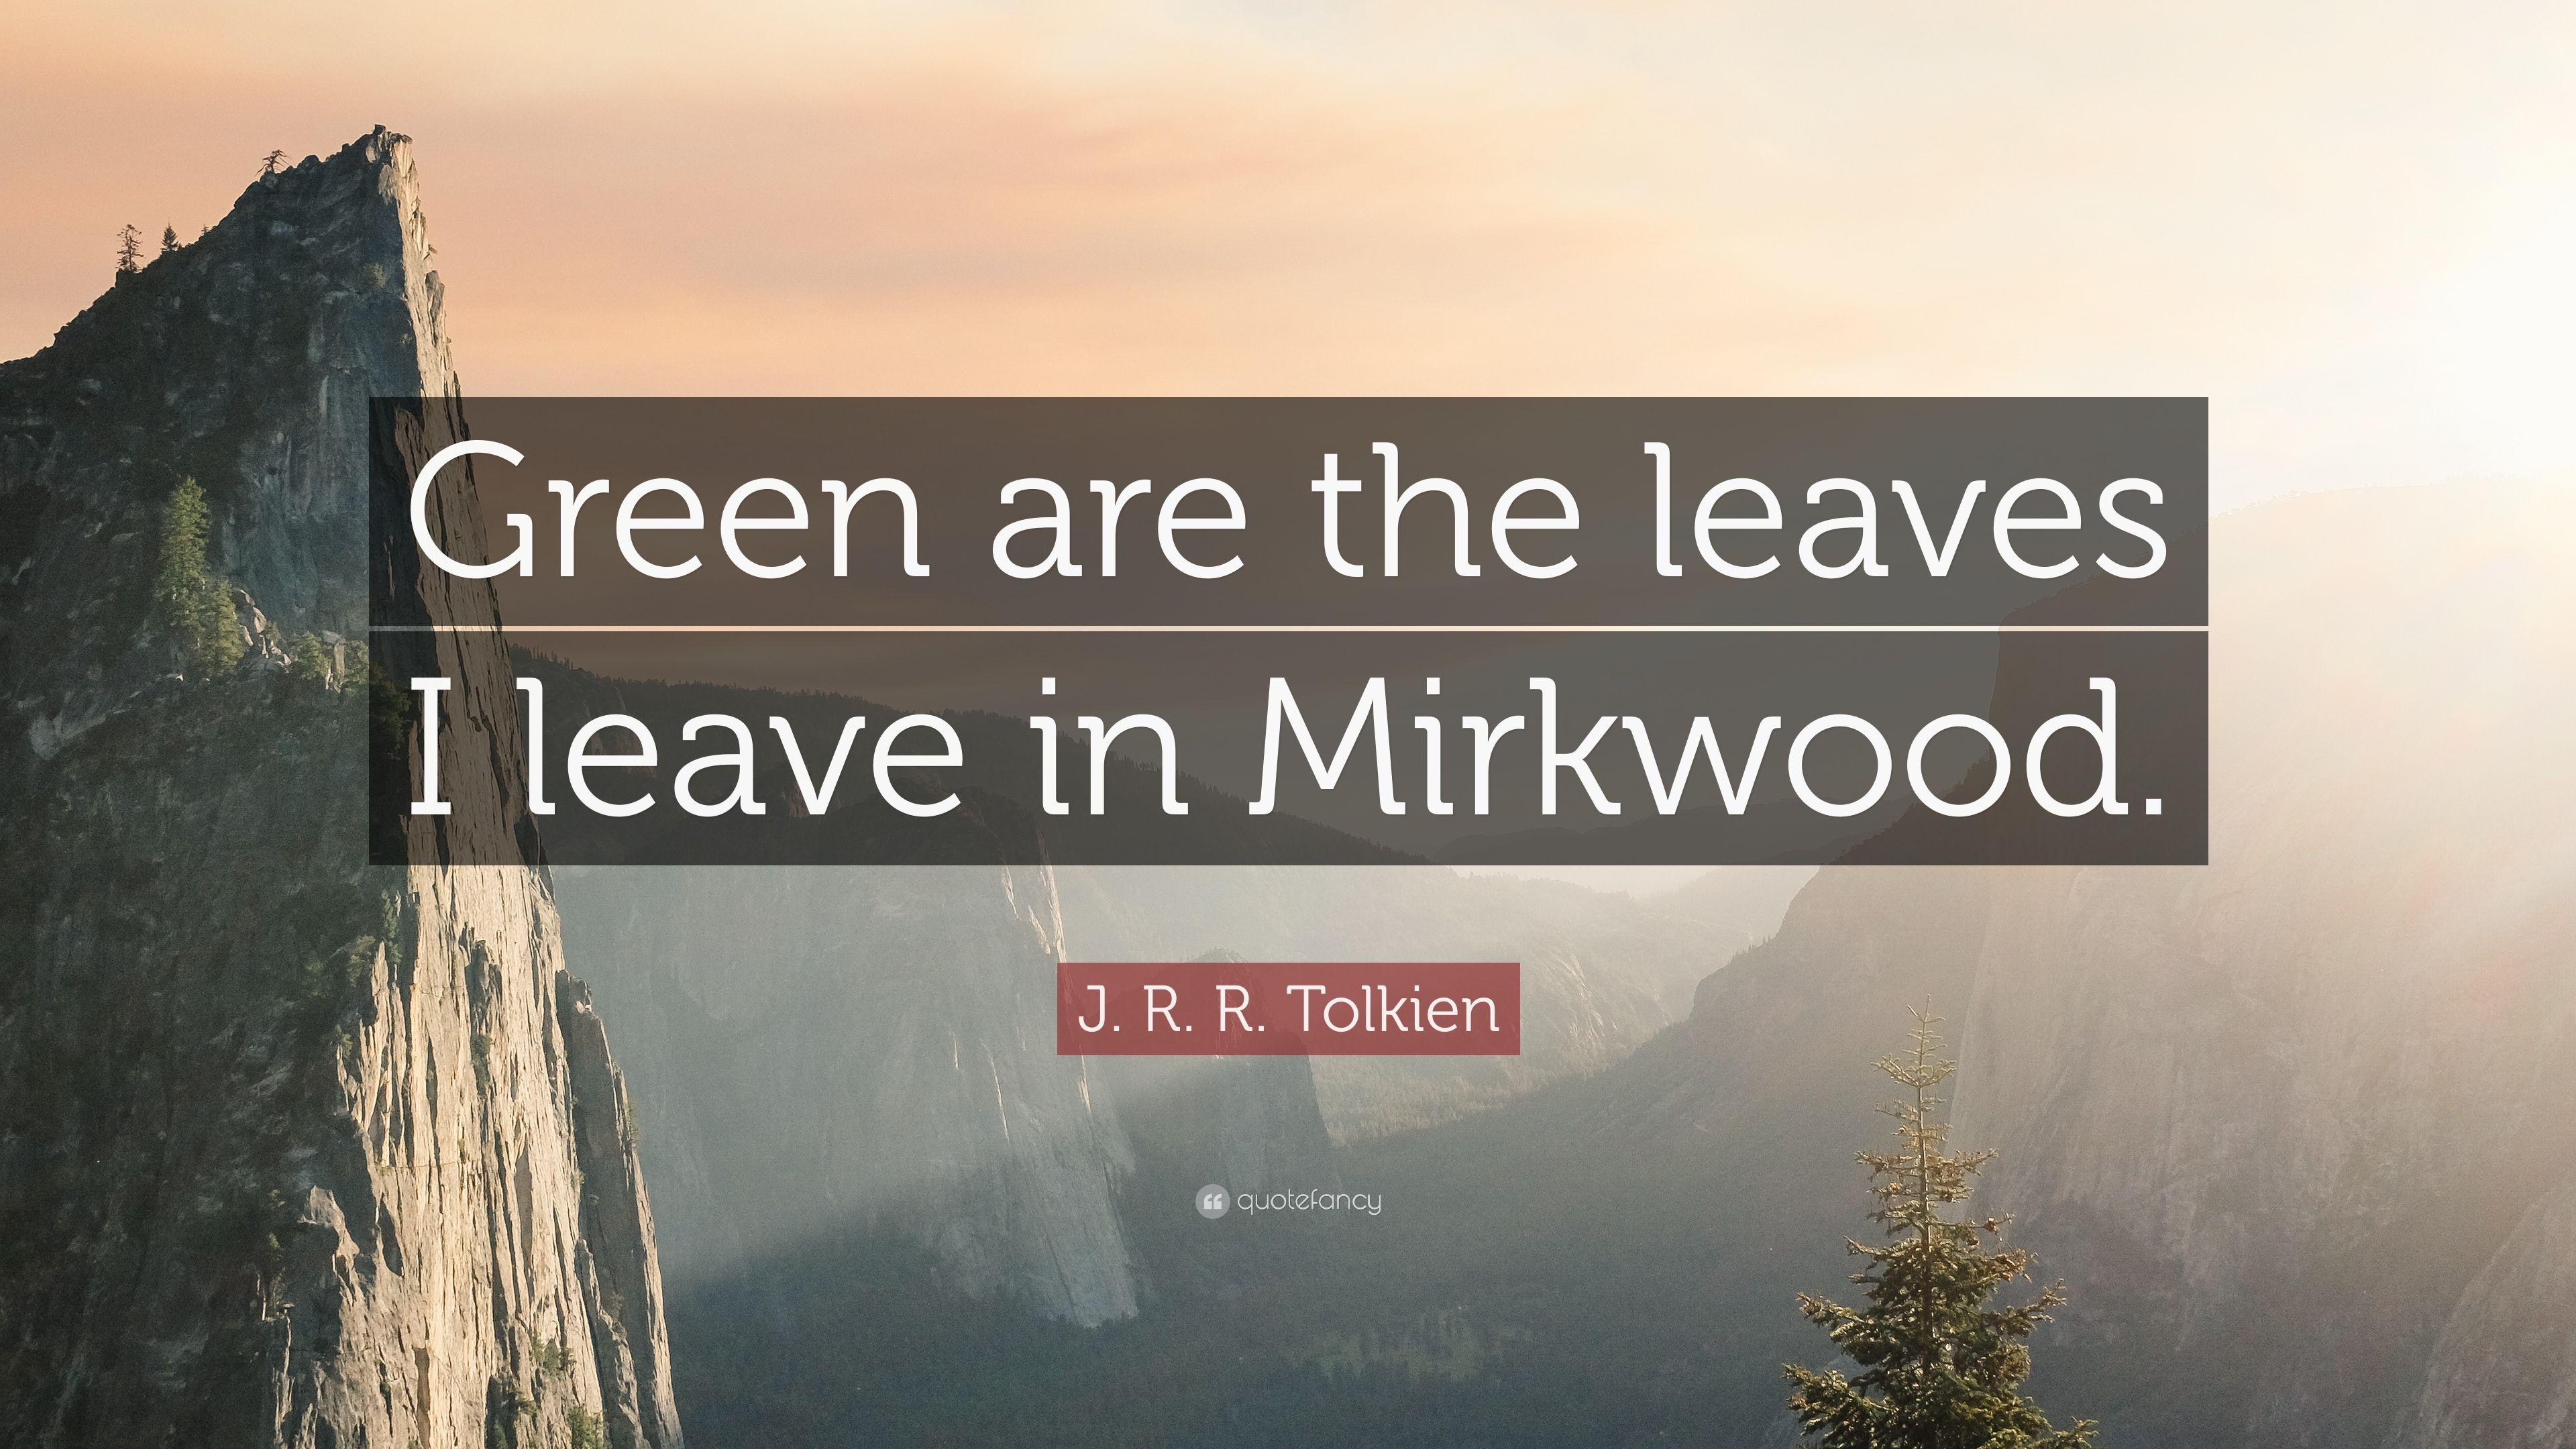 J. R. R. Tolkien Quote: “Green are the leaves I leave in Mirkwood